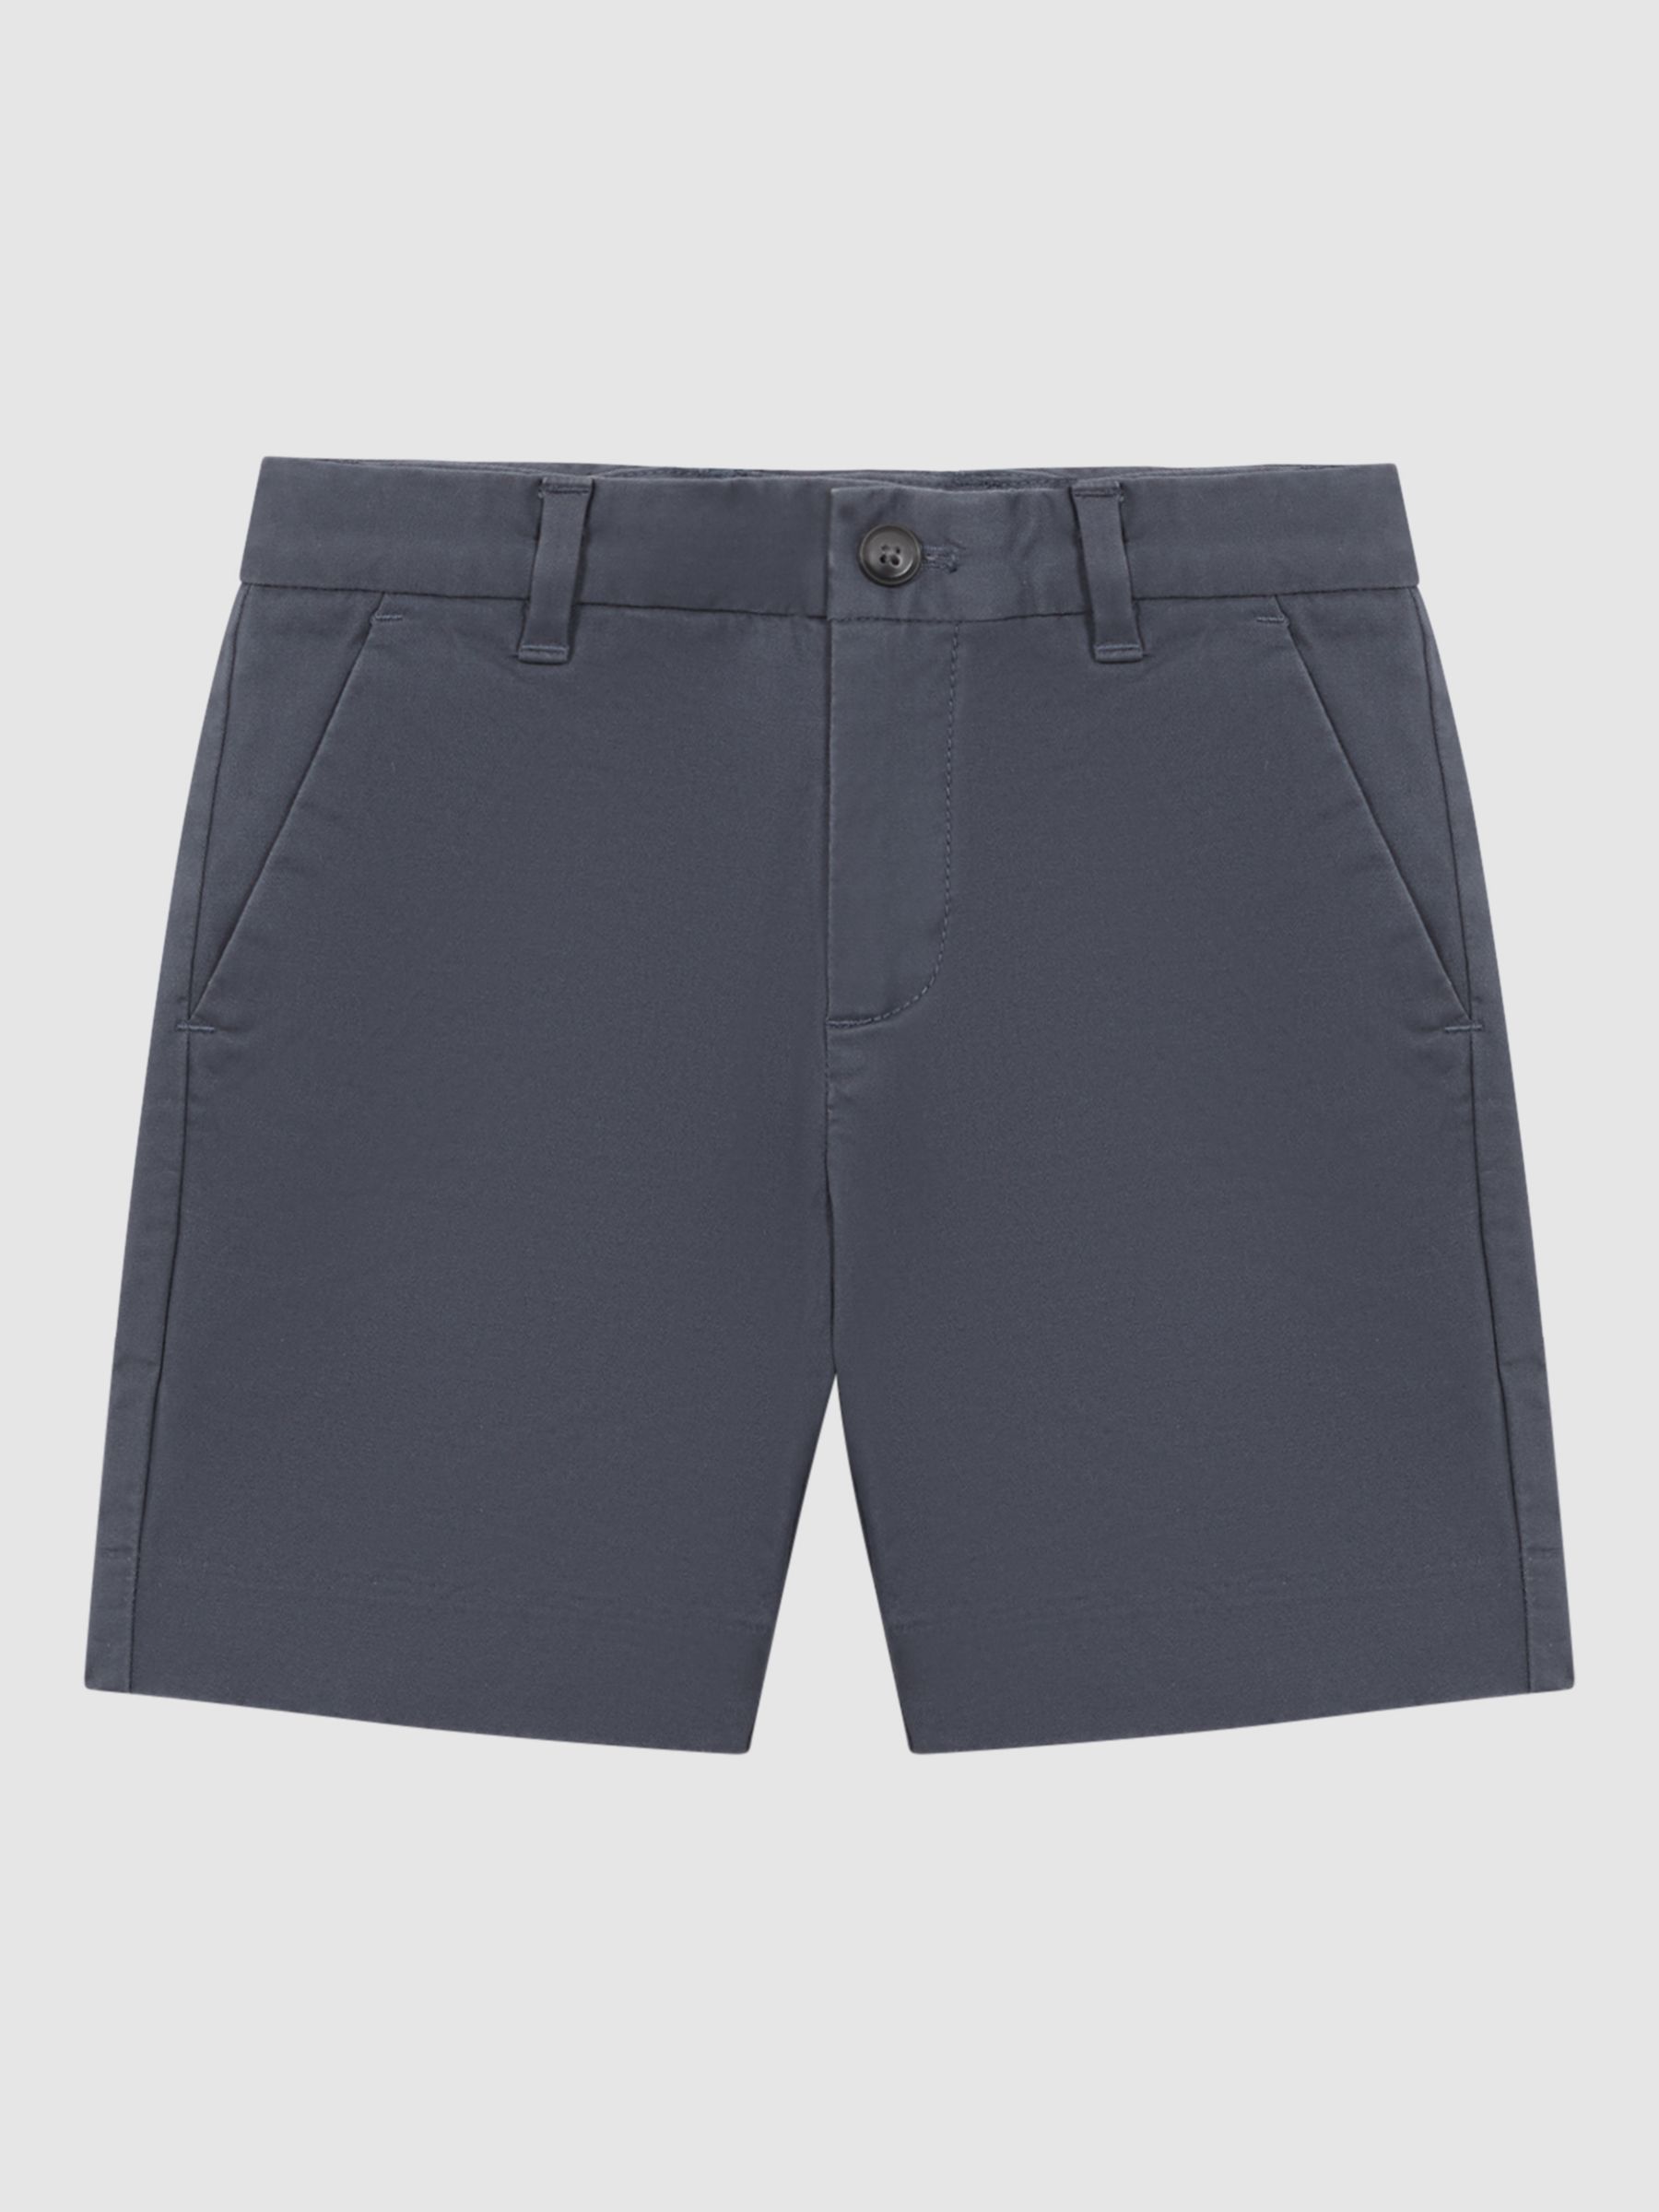 Reiss Kids' Wicket Cotton Blend Casual Chino Shorts, Navy, 8-9 years